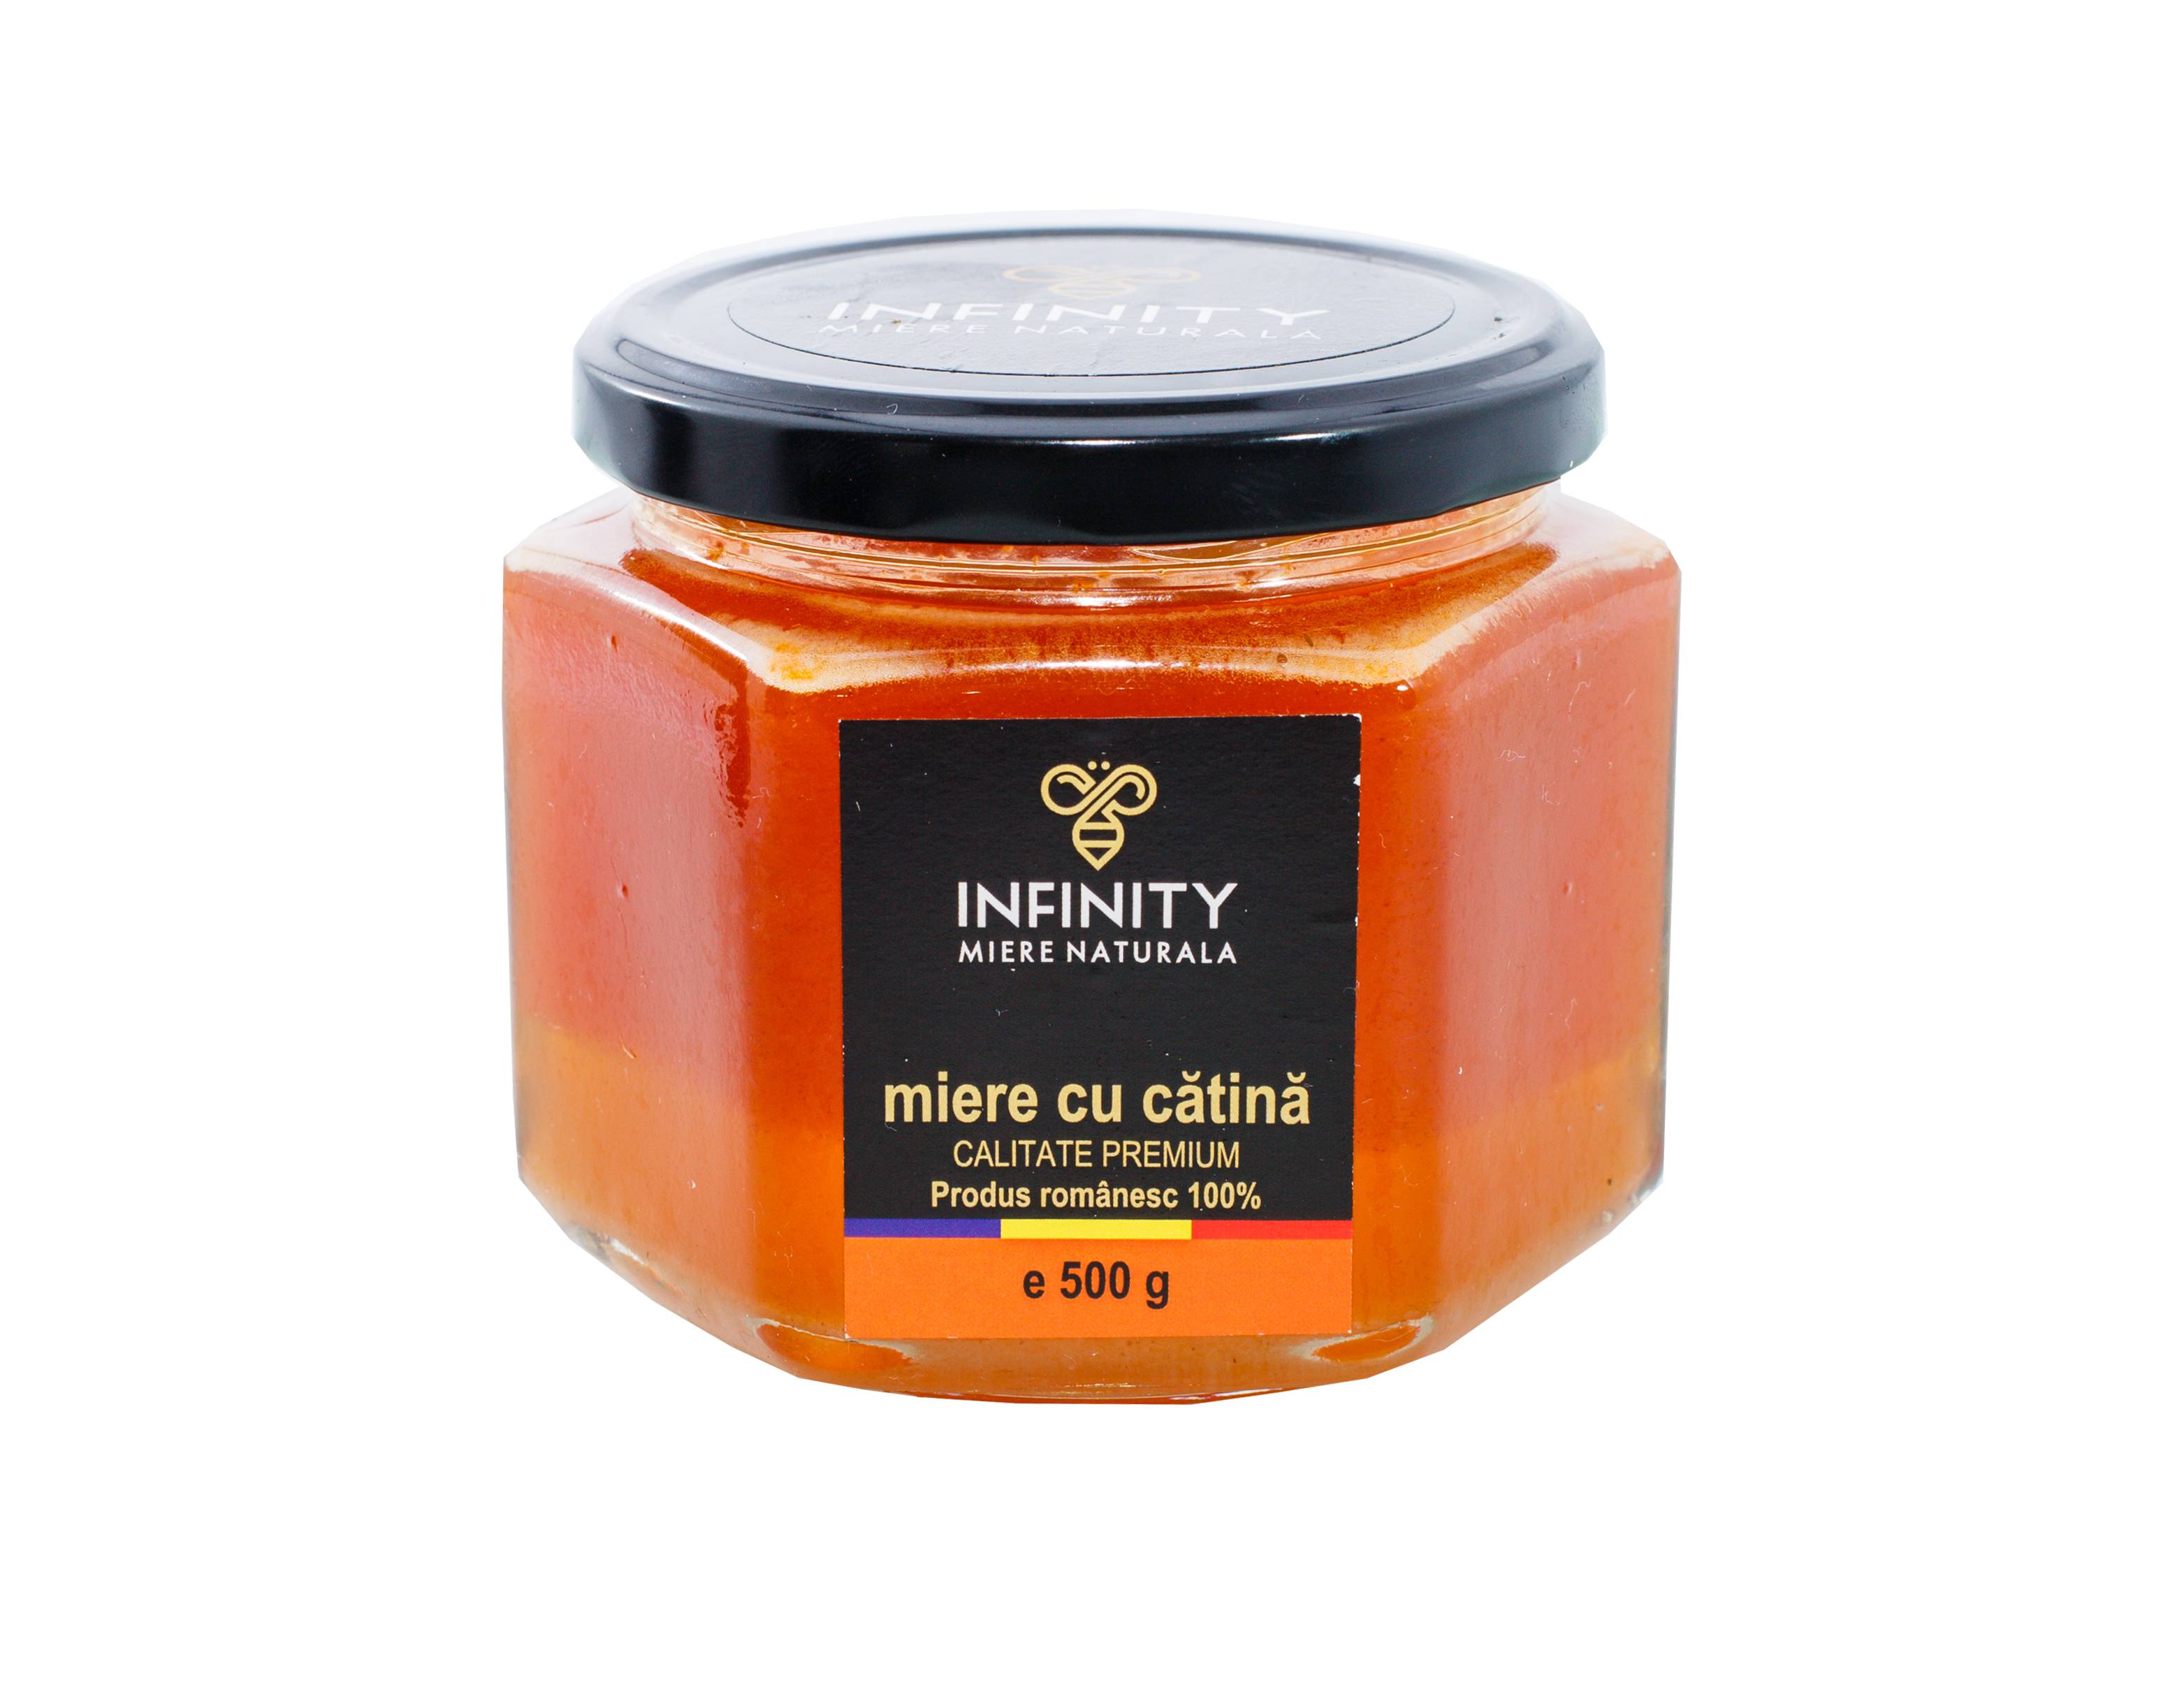 Miere cu catina 500g - infinity